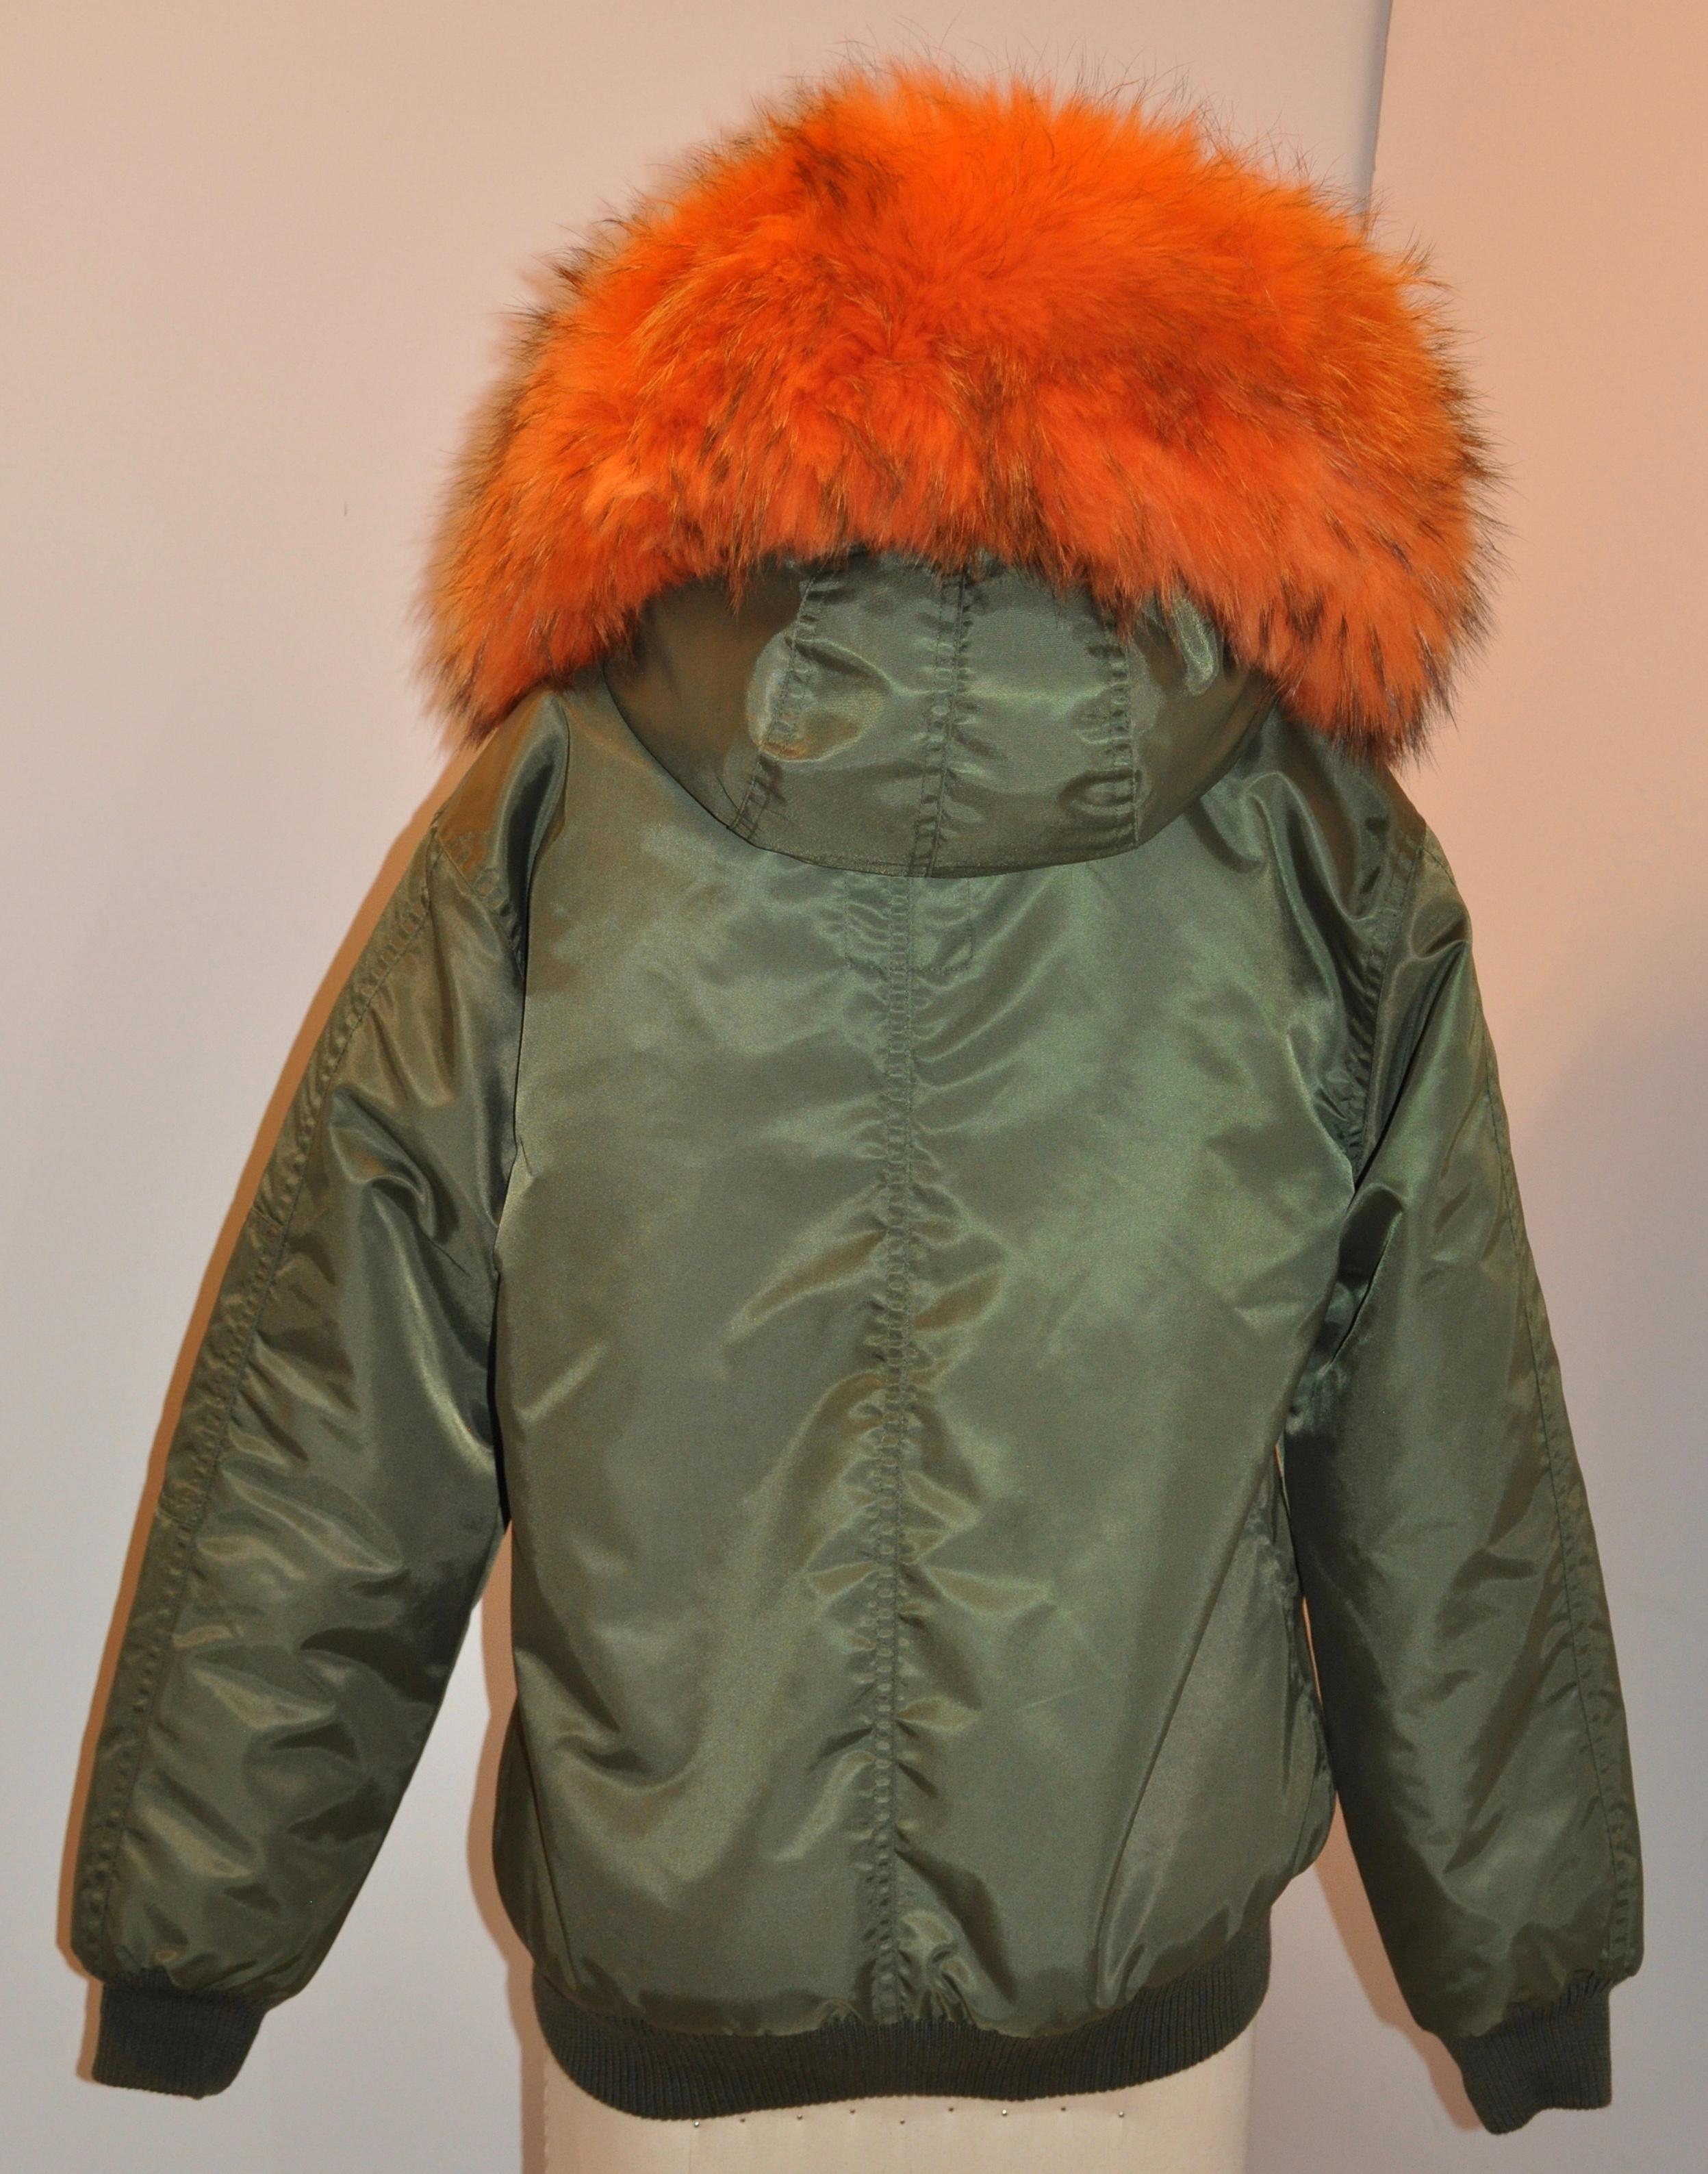 Orange Olive Green Fully Lined with Tangerine Fox and Sheared Mink Hooded Zipper Jacket For Sale